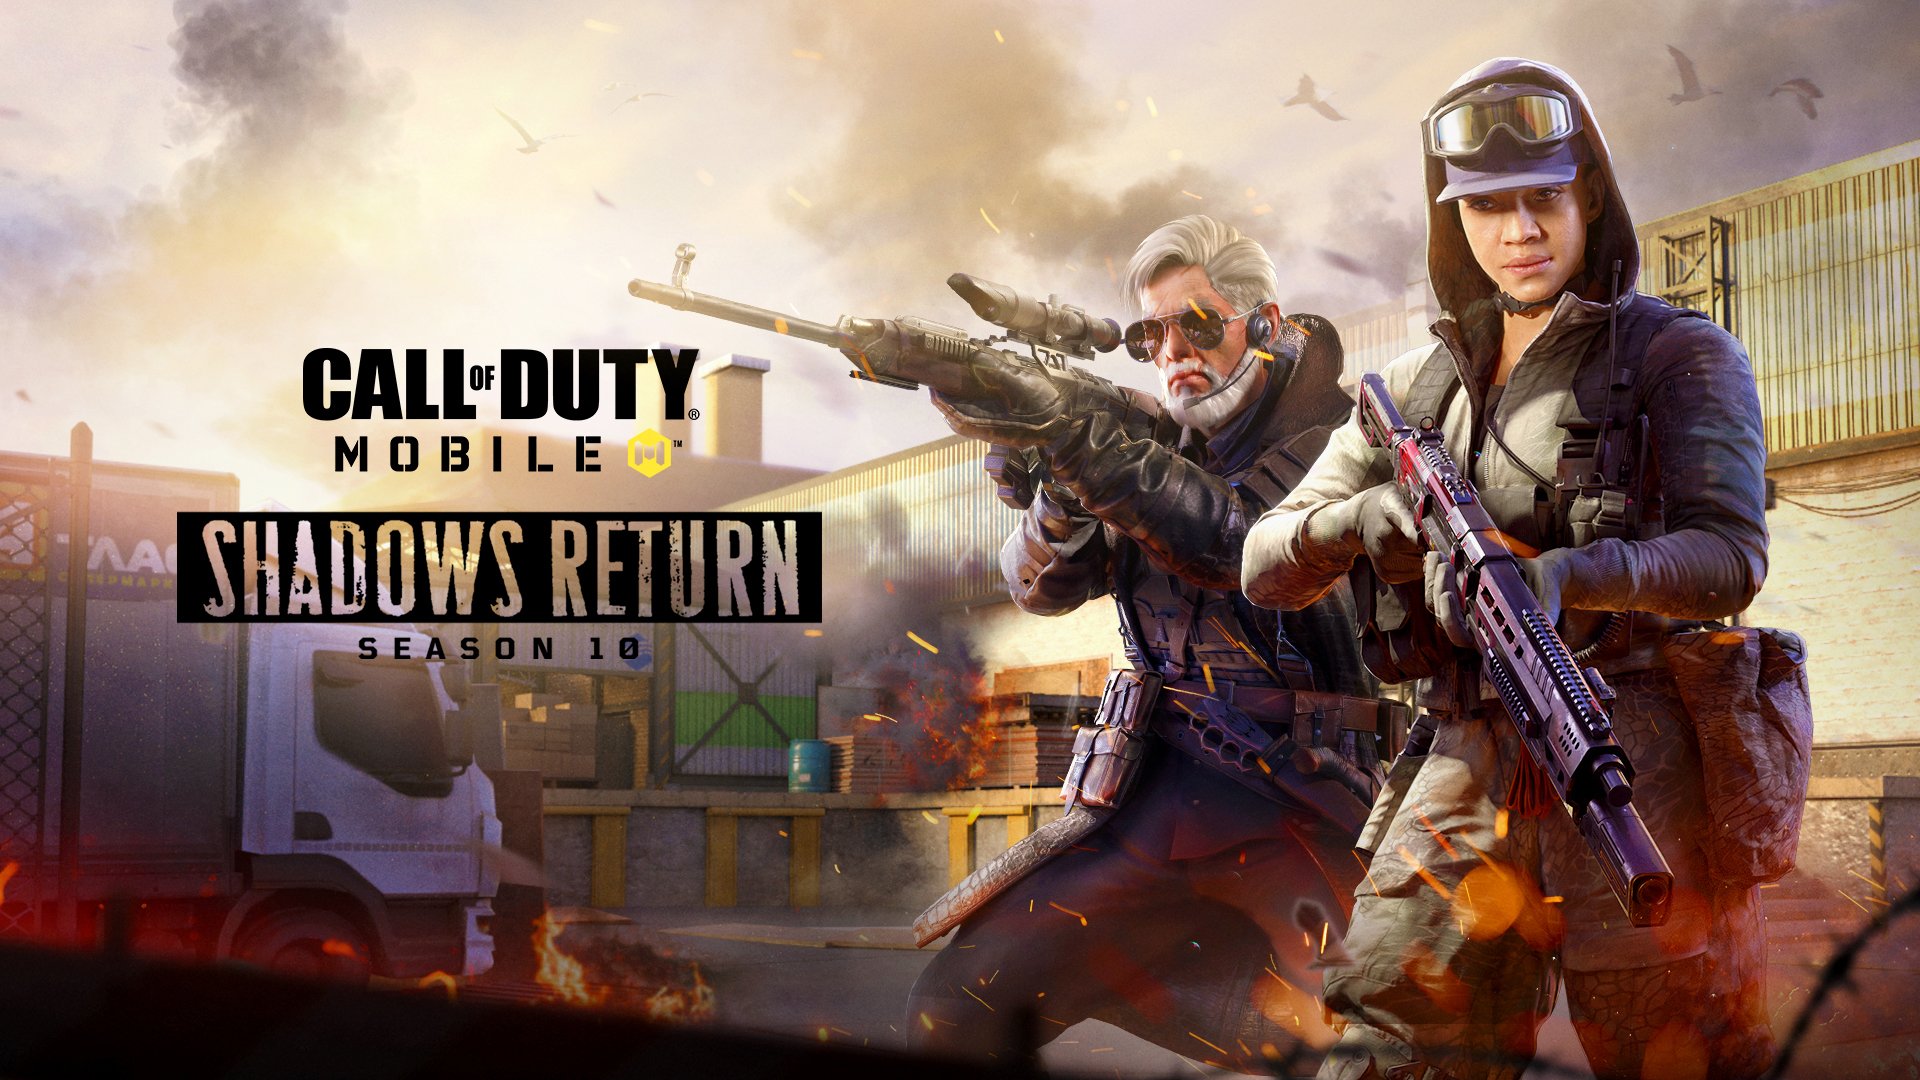 COD Mobile Ranked Series 5: Release Date, Time, Rewards